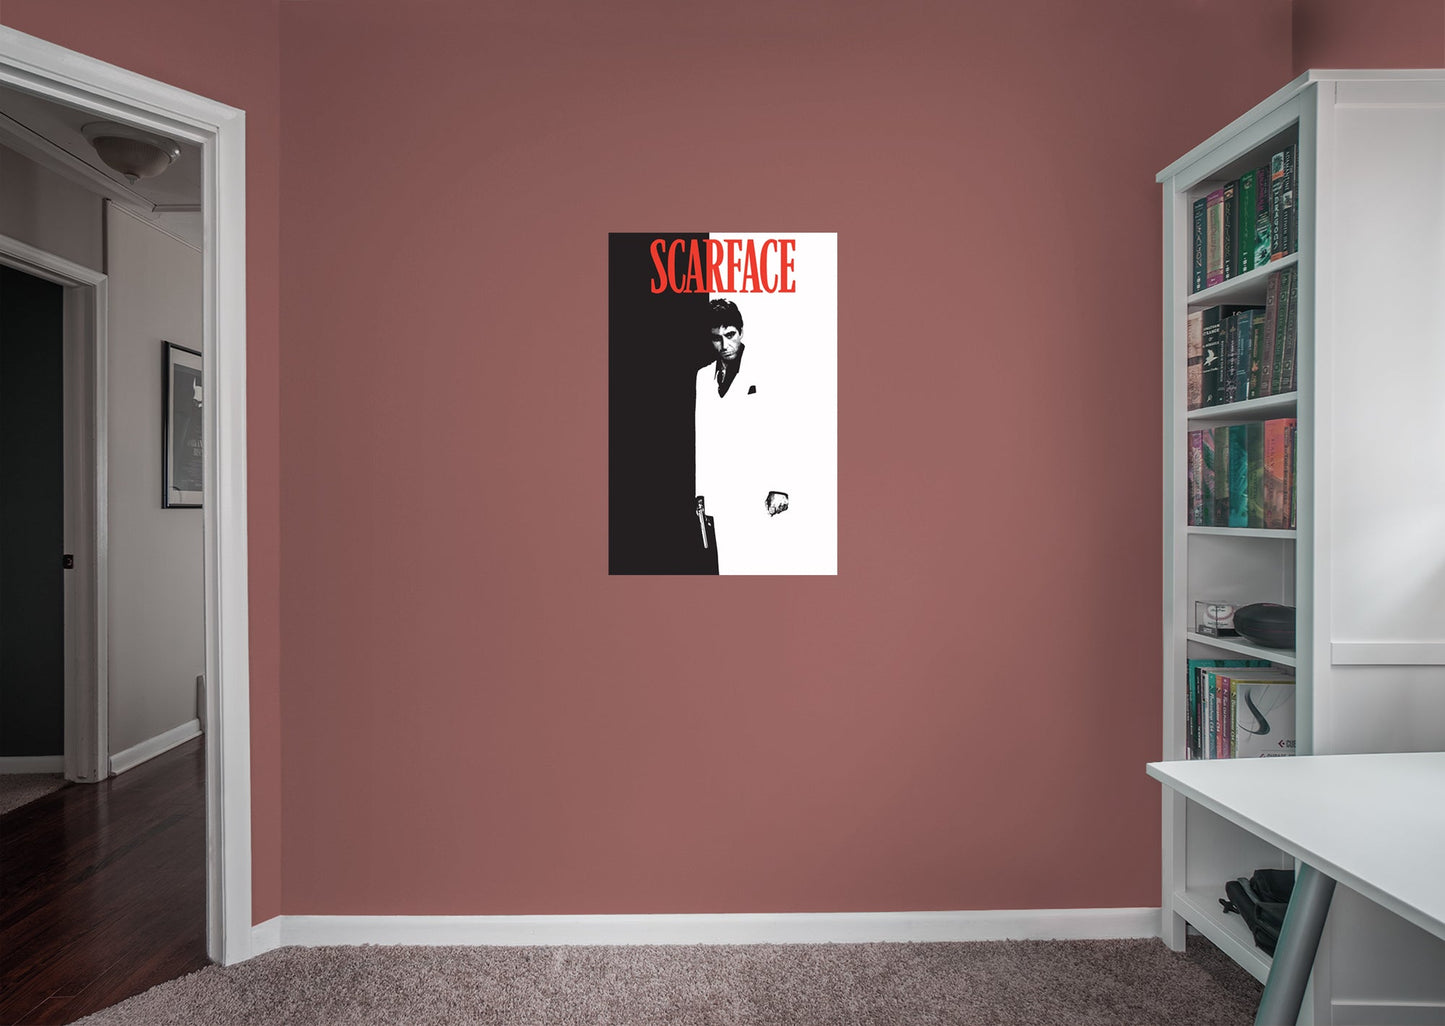 Scarface:  Movie Poster Mural        - Officially Licensed NBC Universal Removable Wall   Adhesive Decal